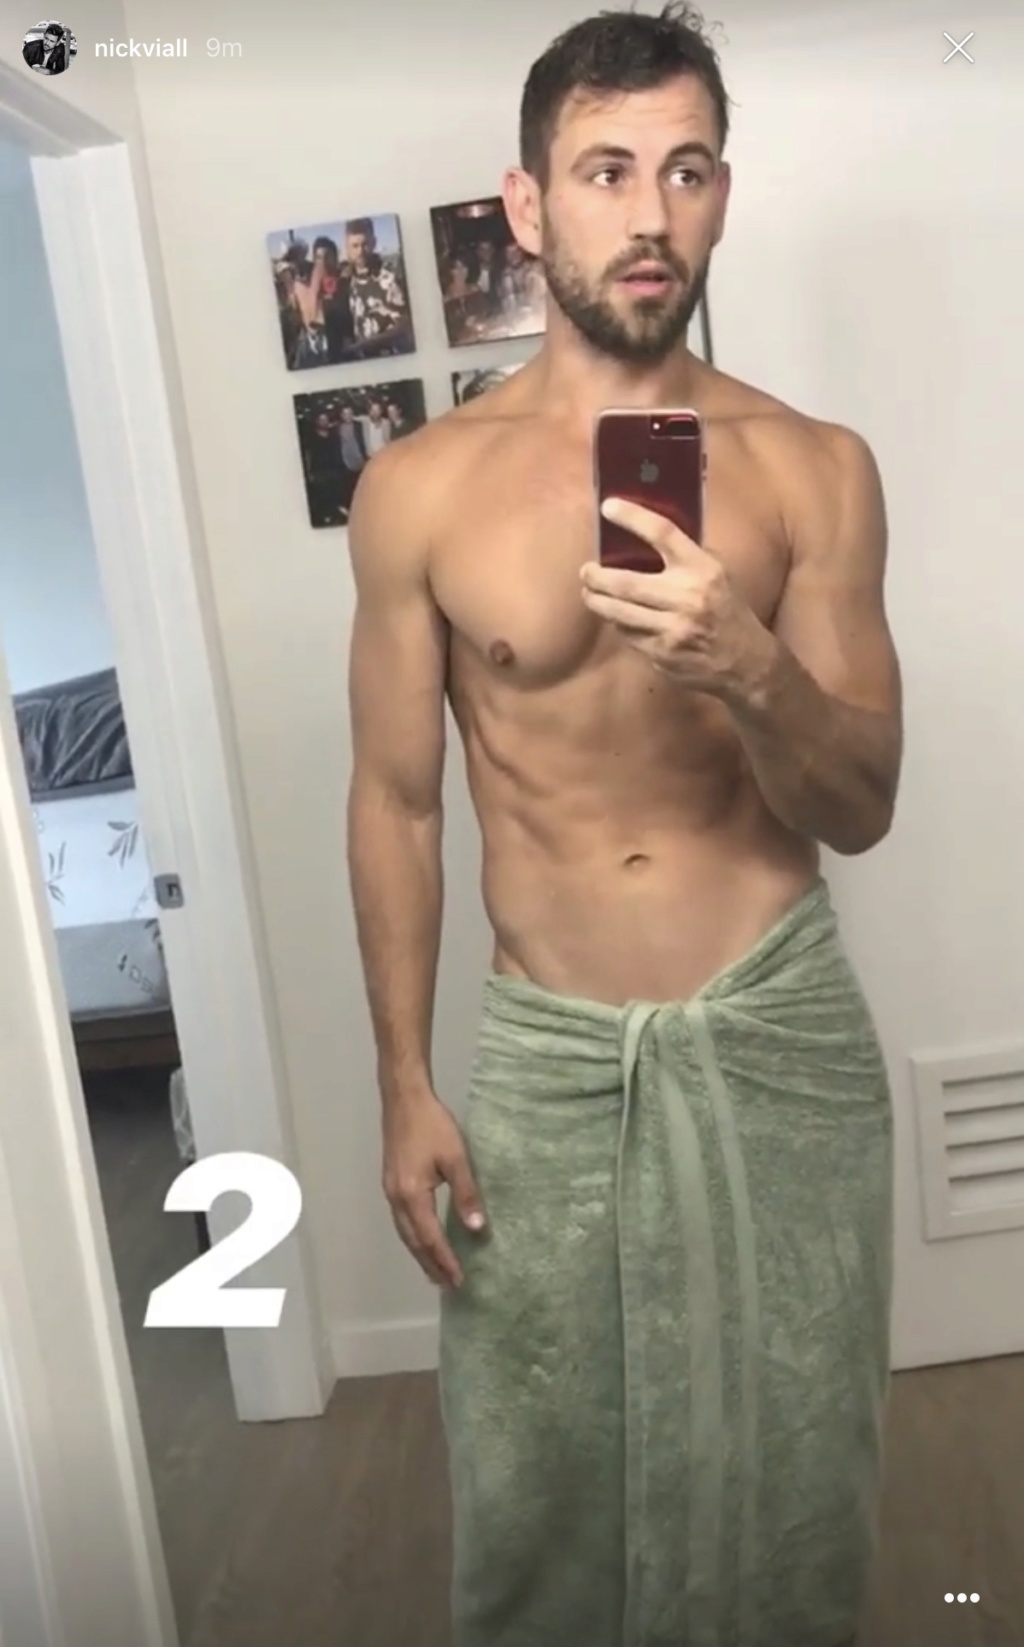 grateful - Nick Viall - Bachelor 21 - FAN Forum - Discussion #27 - Page 32 255adf10